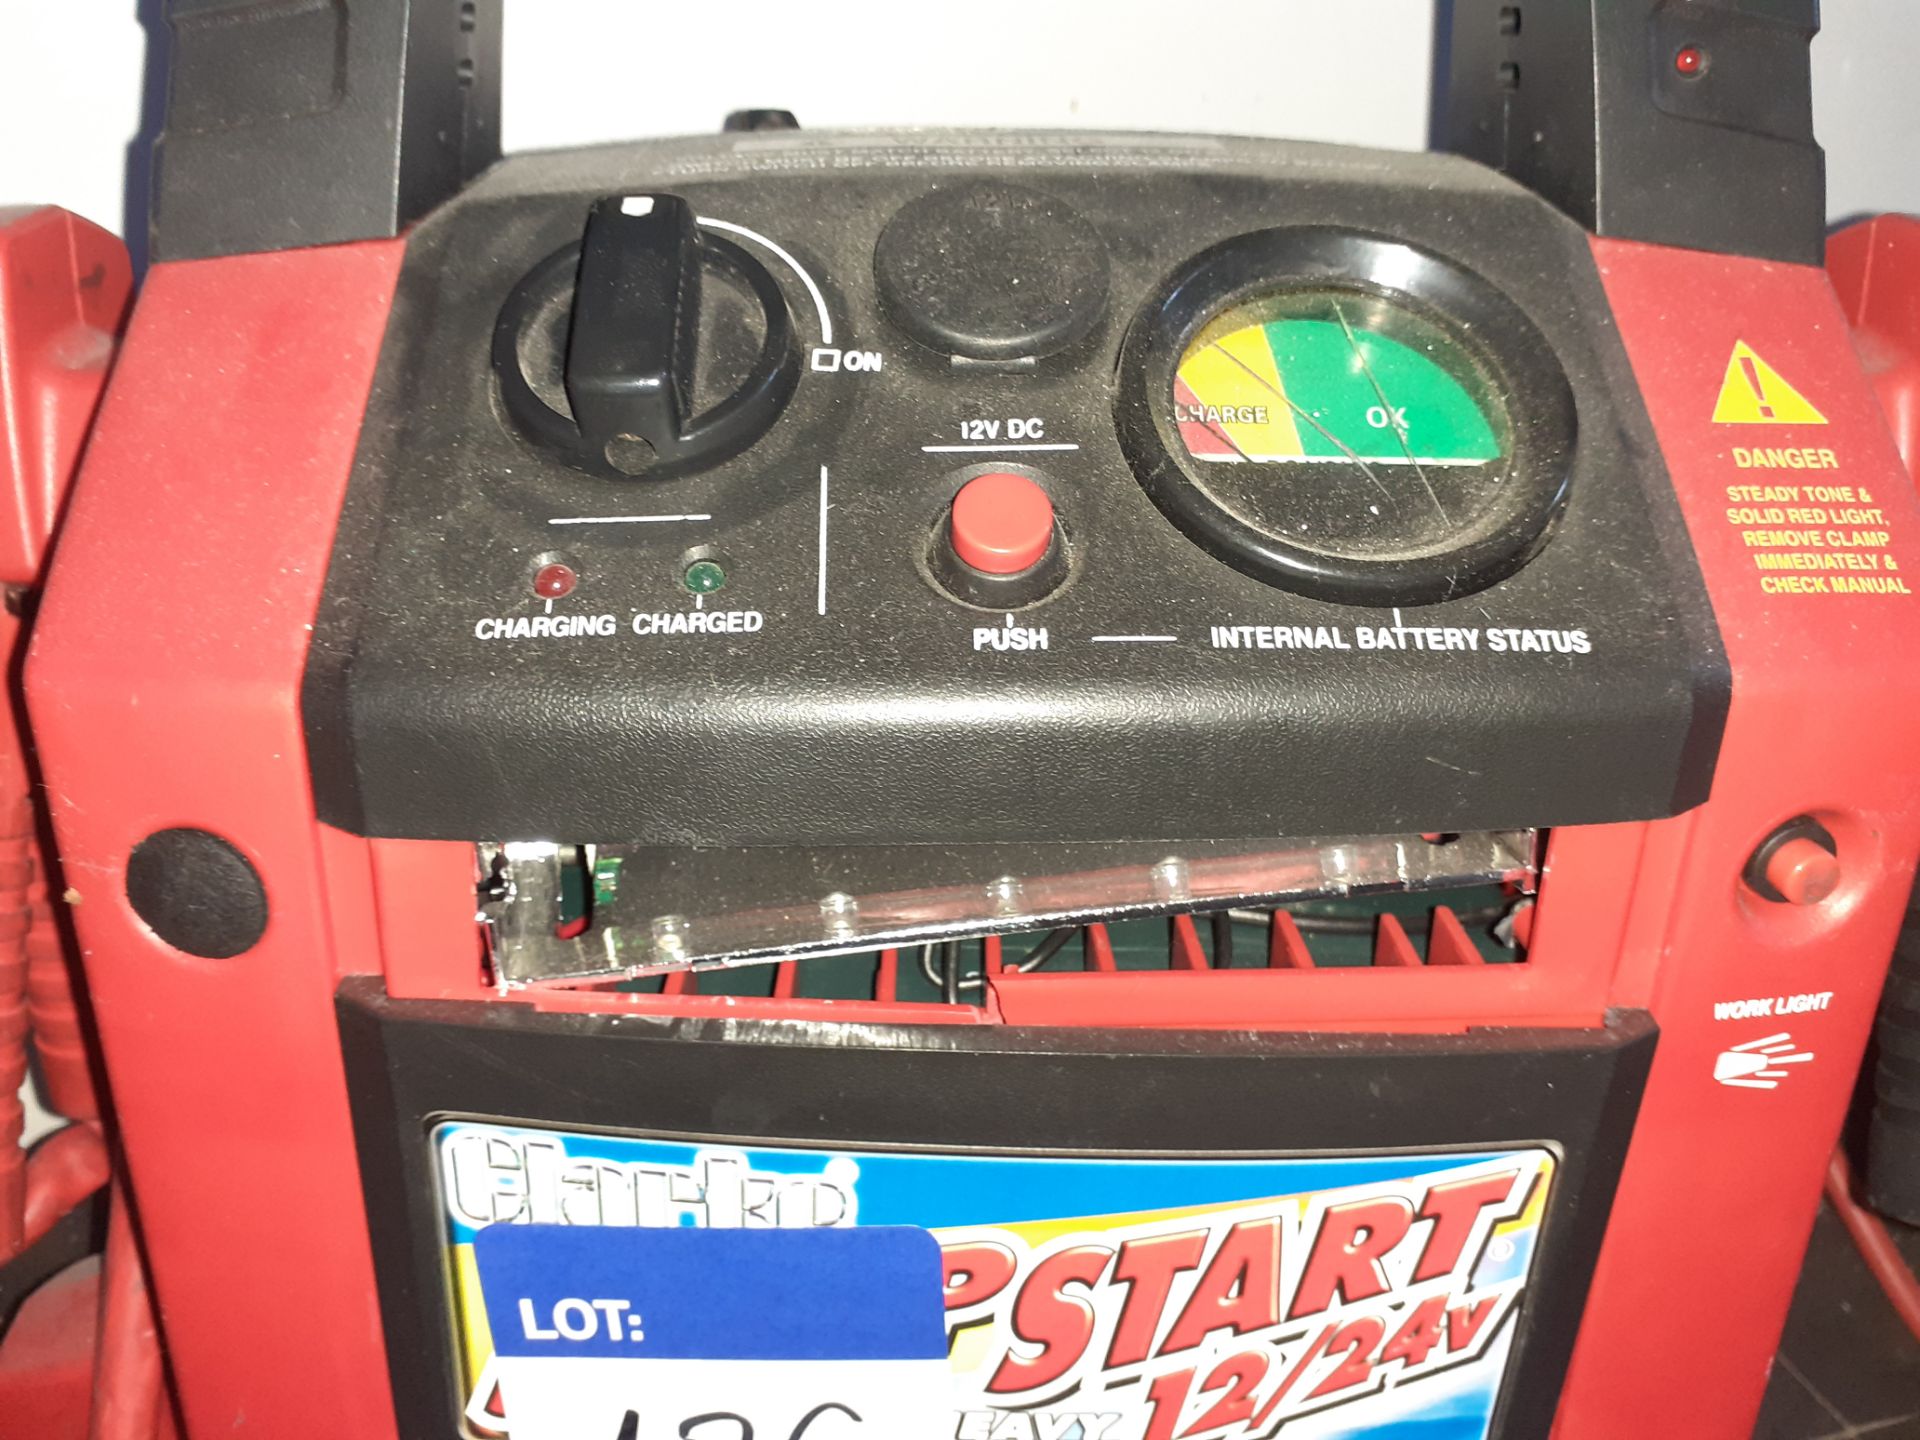 2x Car Jump Starters - Image 2 of 4